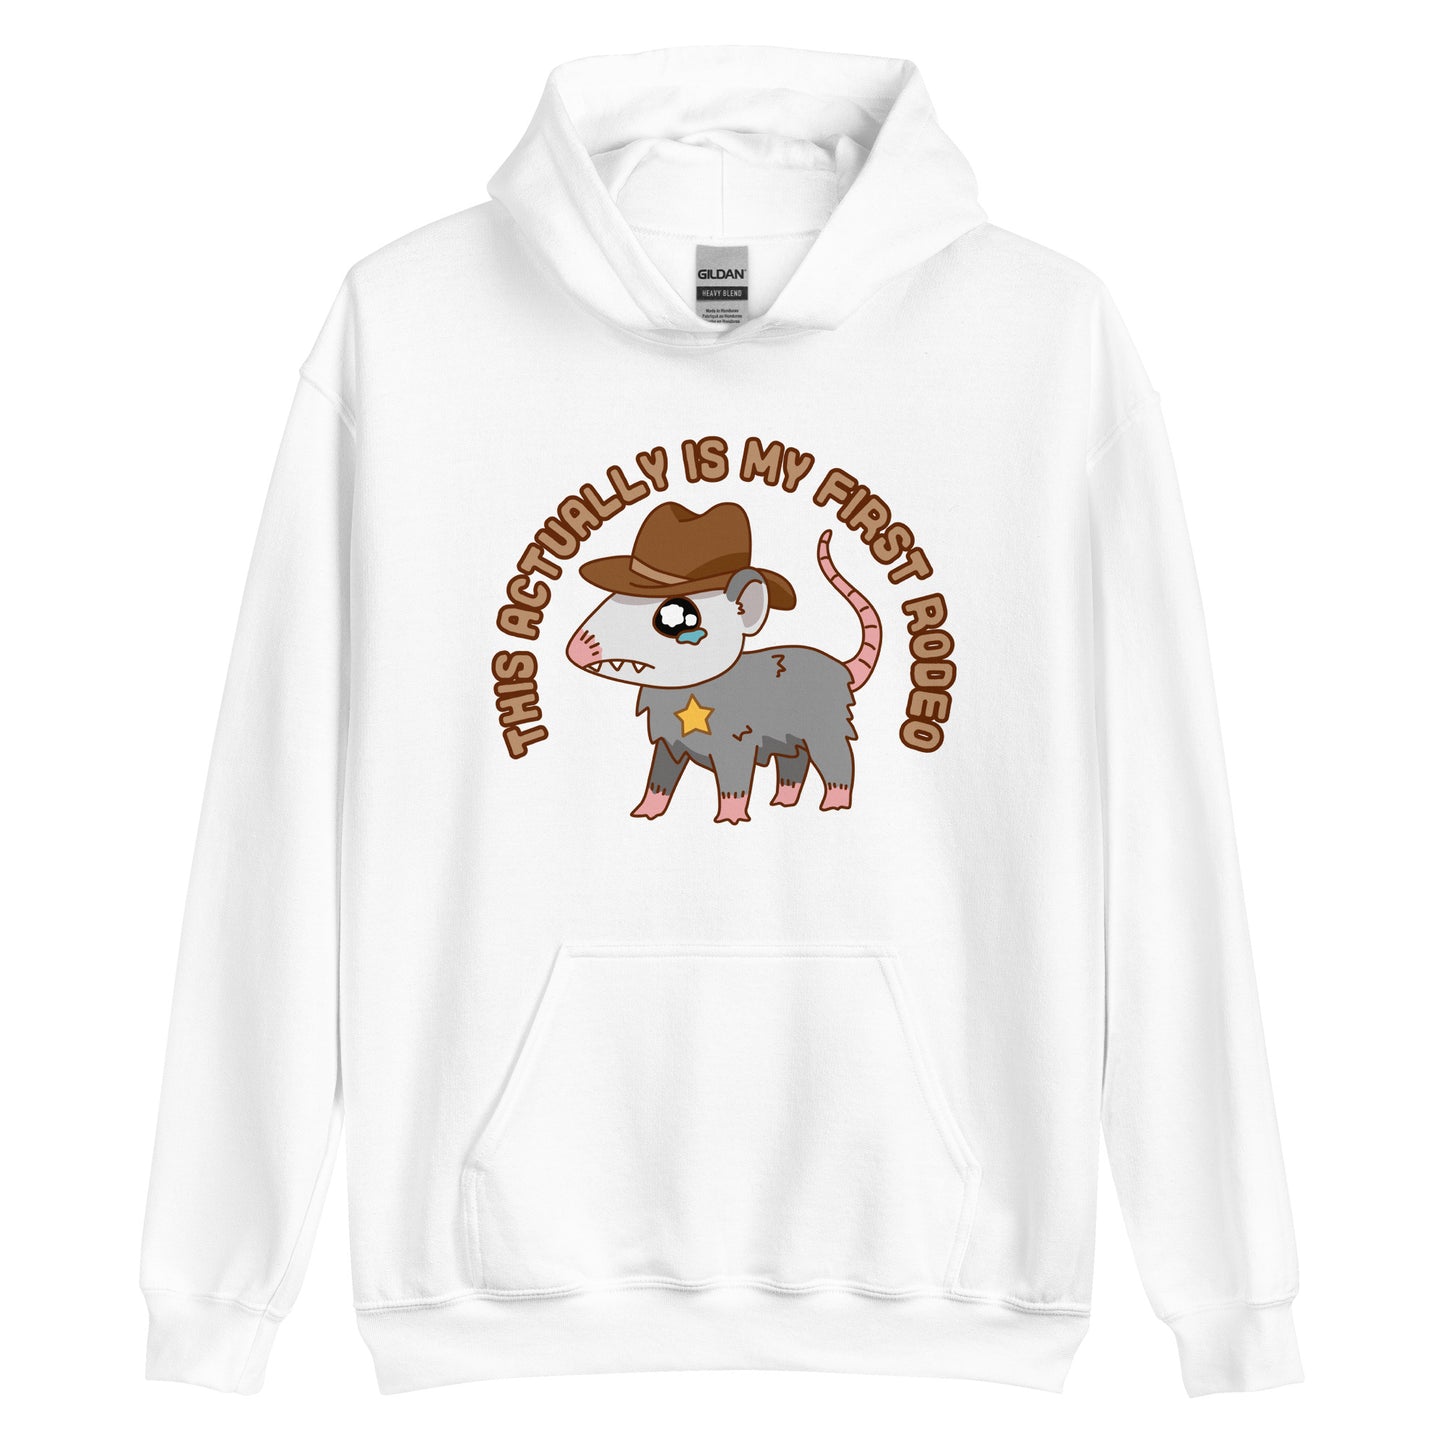 A white hooded sweatshirt featuring an illustration of a cute and nervous possum wearing a cowboy hat and sherrif's star badge. Text above the possum in an arc reads "this actually is my first rodeo".